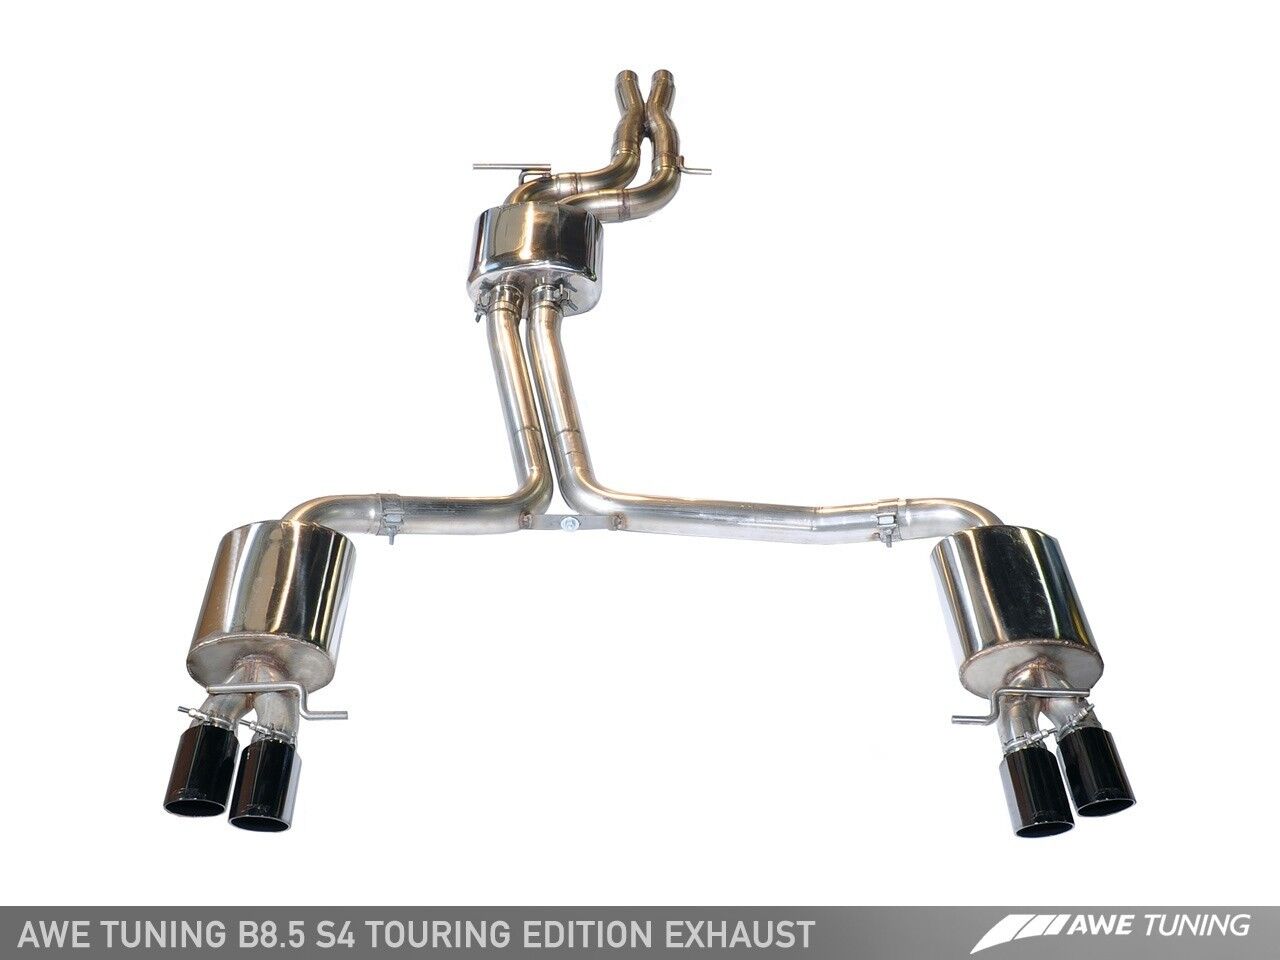 AWE TUNING 2013-2016 AUDI S4 3.0T B8.5 TOURING CATBACK EXHAUST DB 102MM TIPS